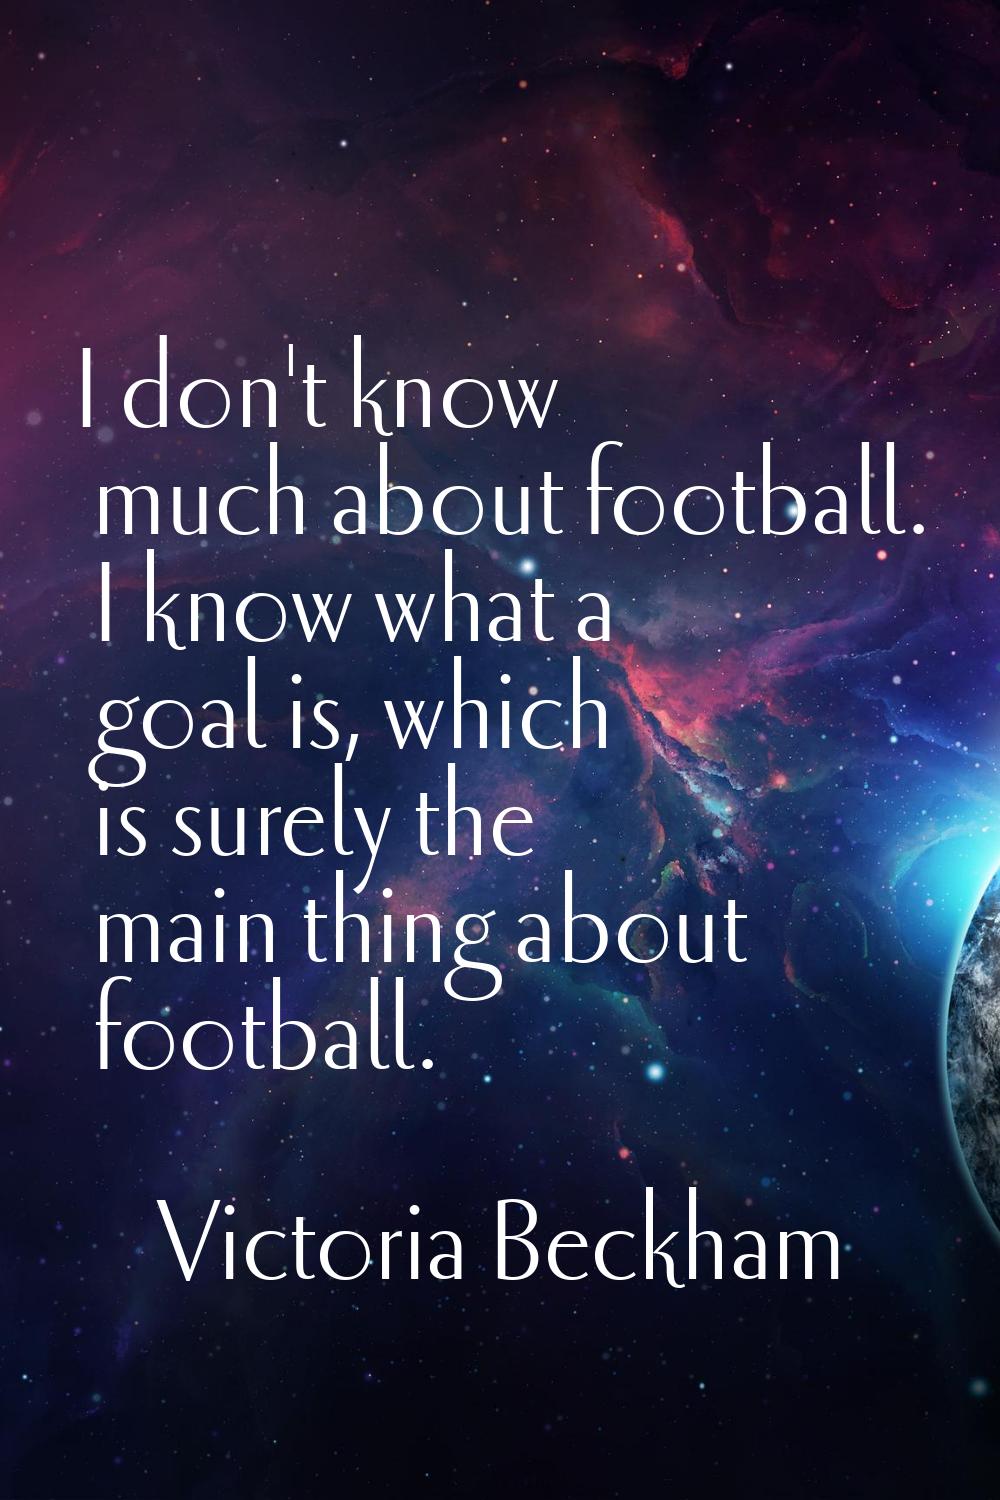 I don't know much about football. I know what a goal is, which is surely the main thing about footb